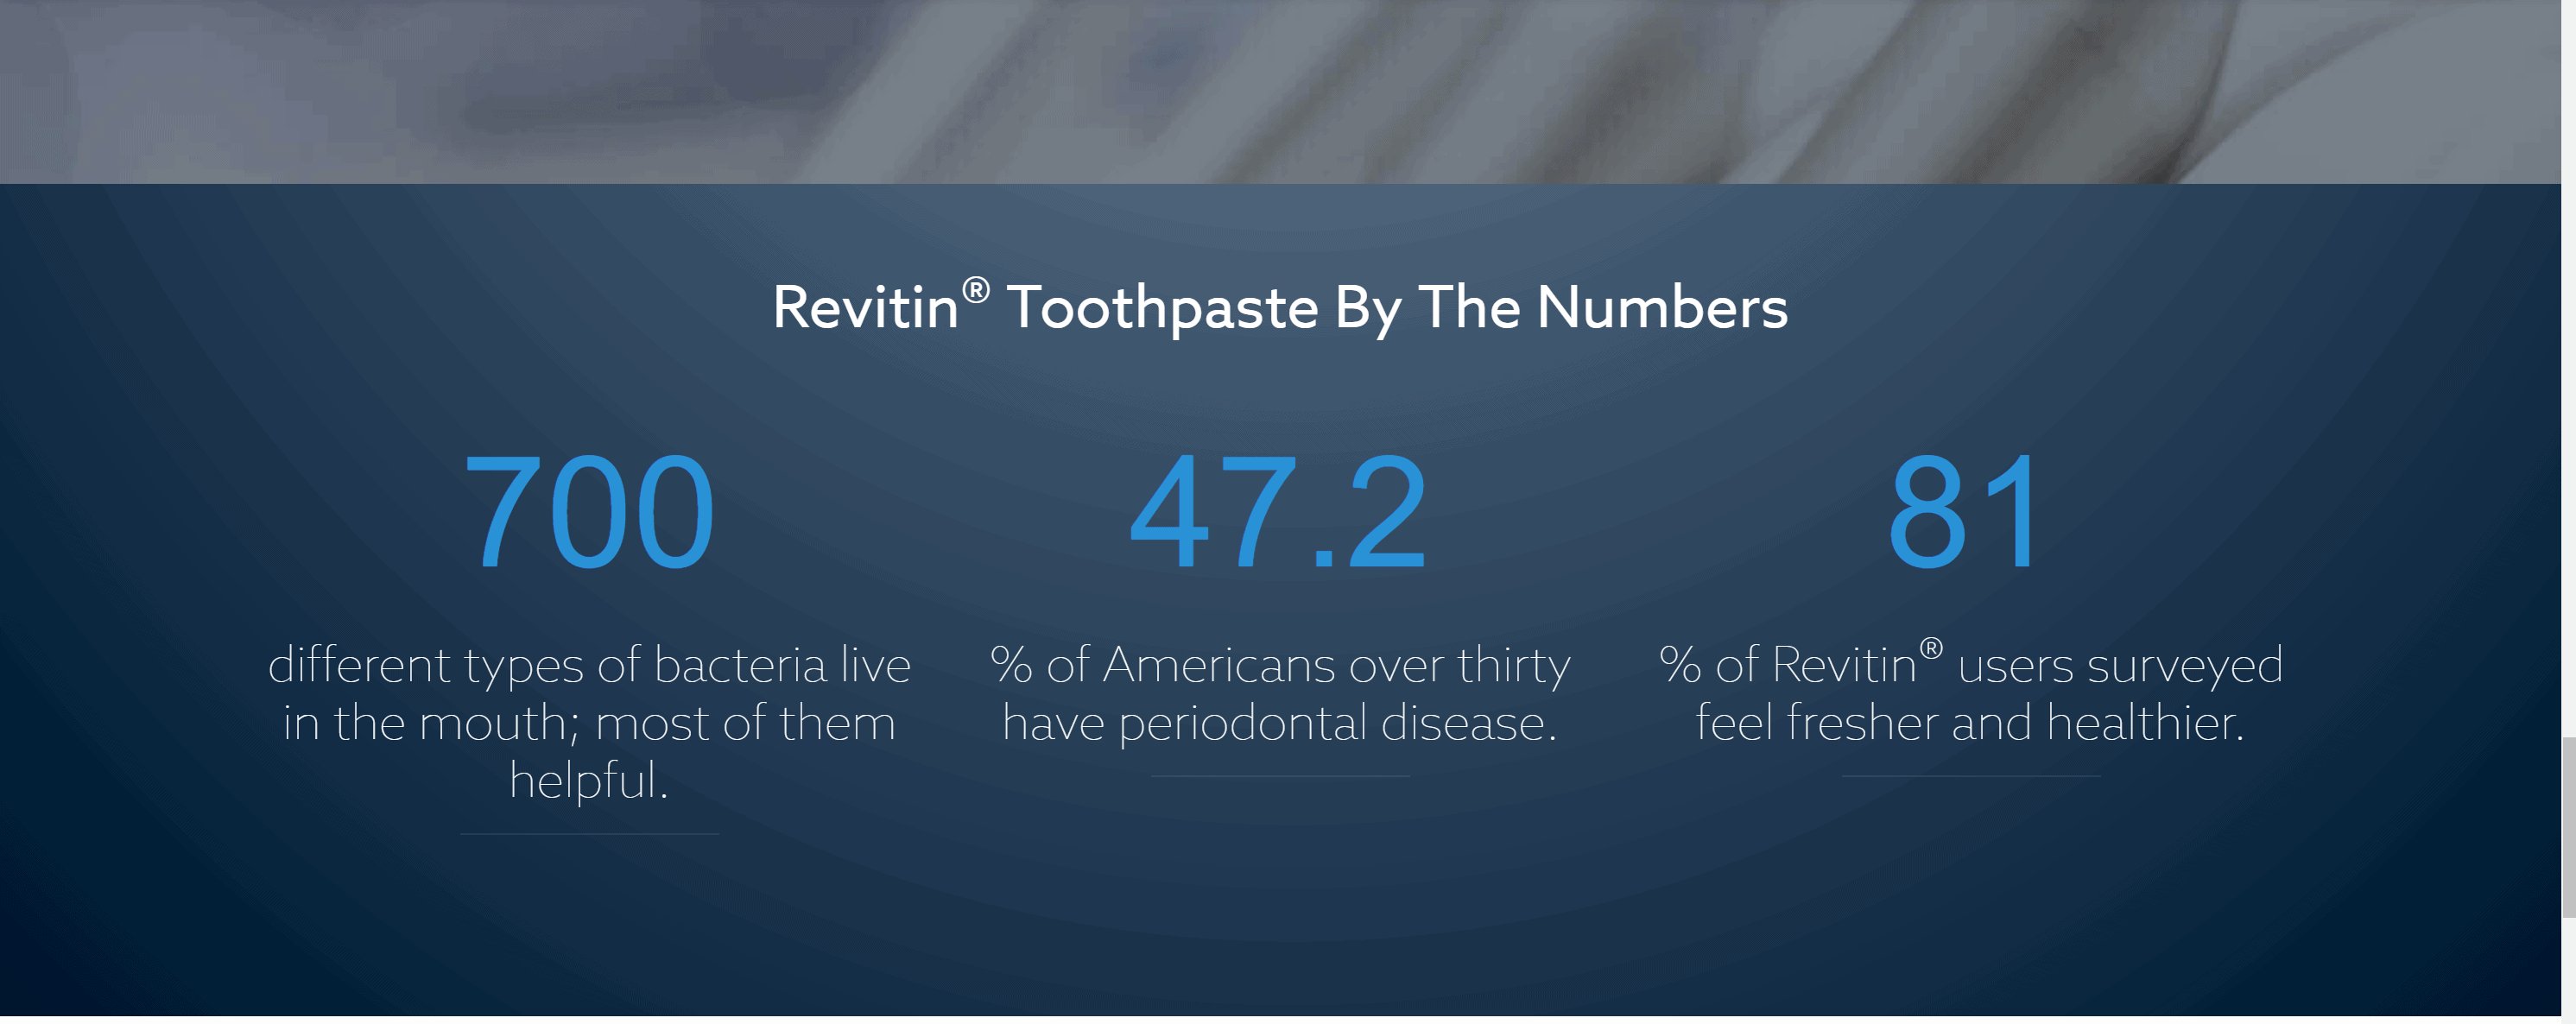 Revitin toothpaste by the number